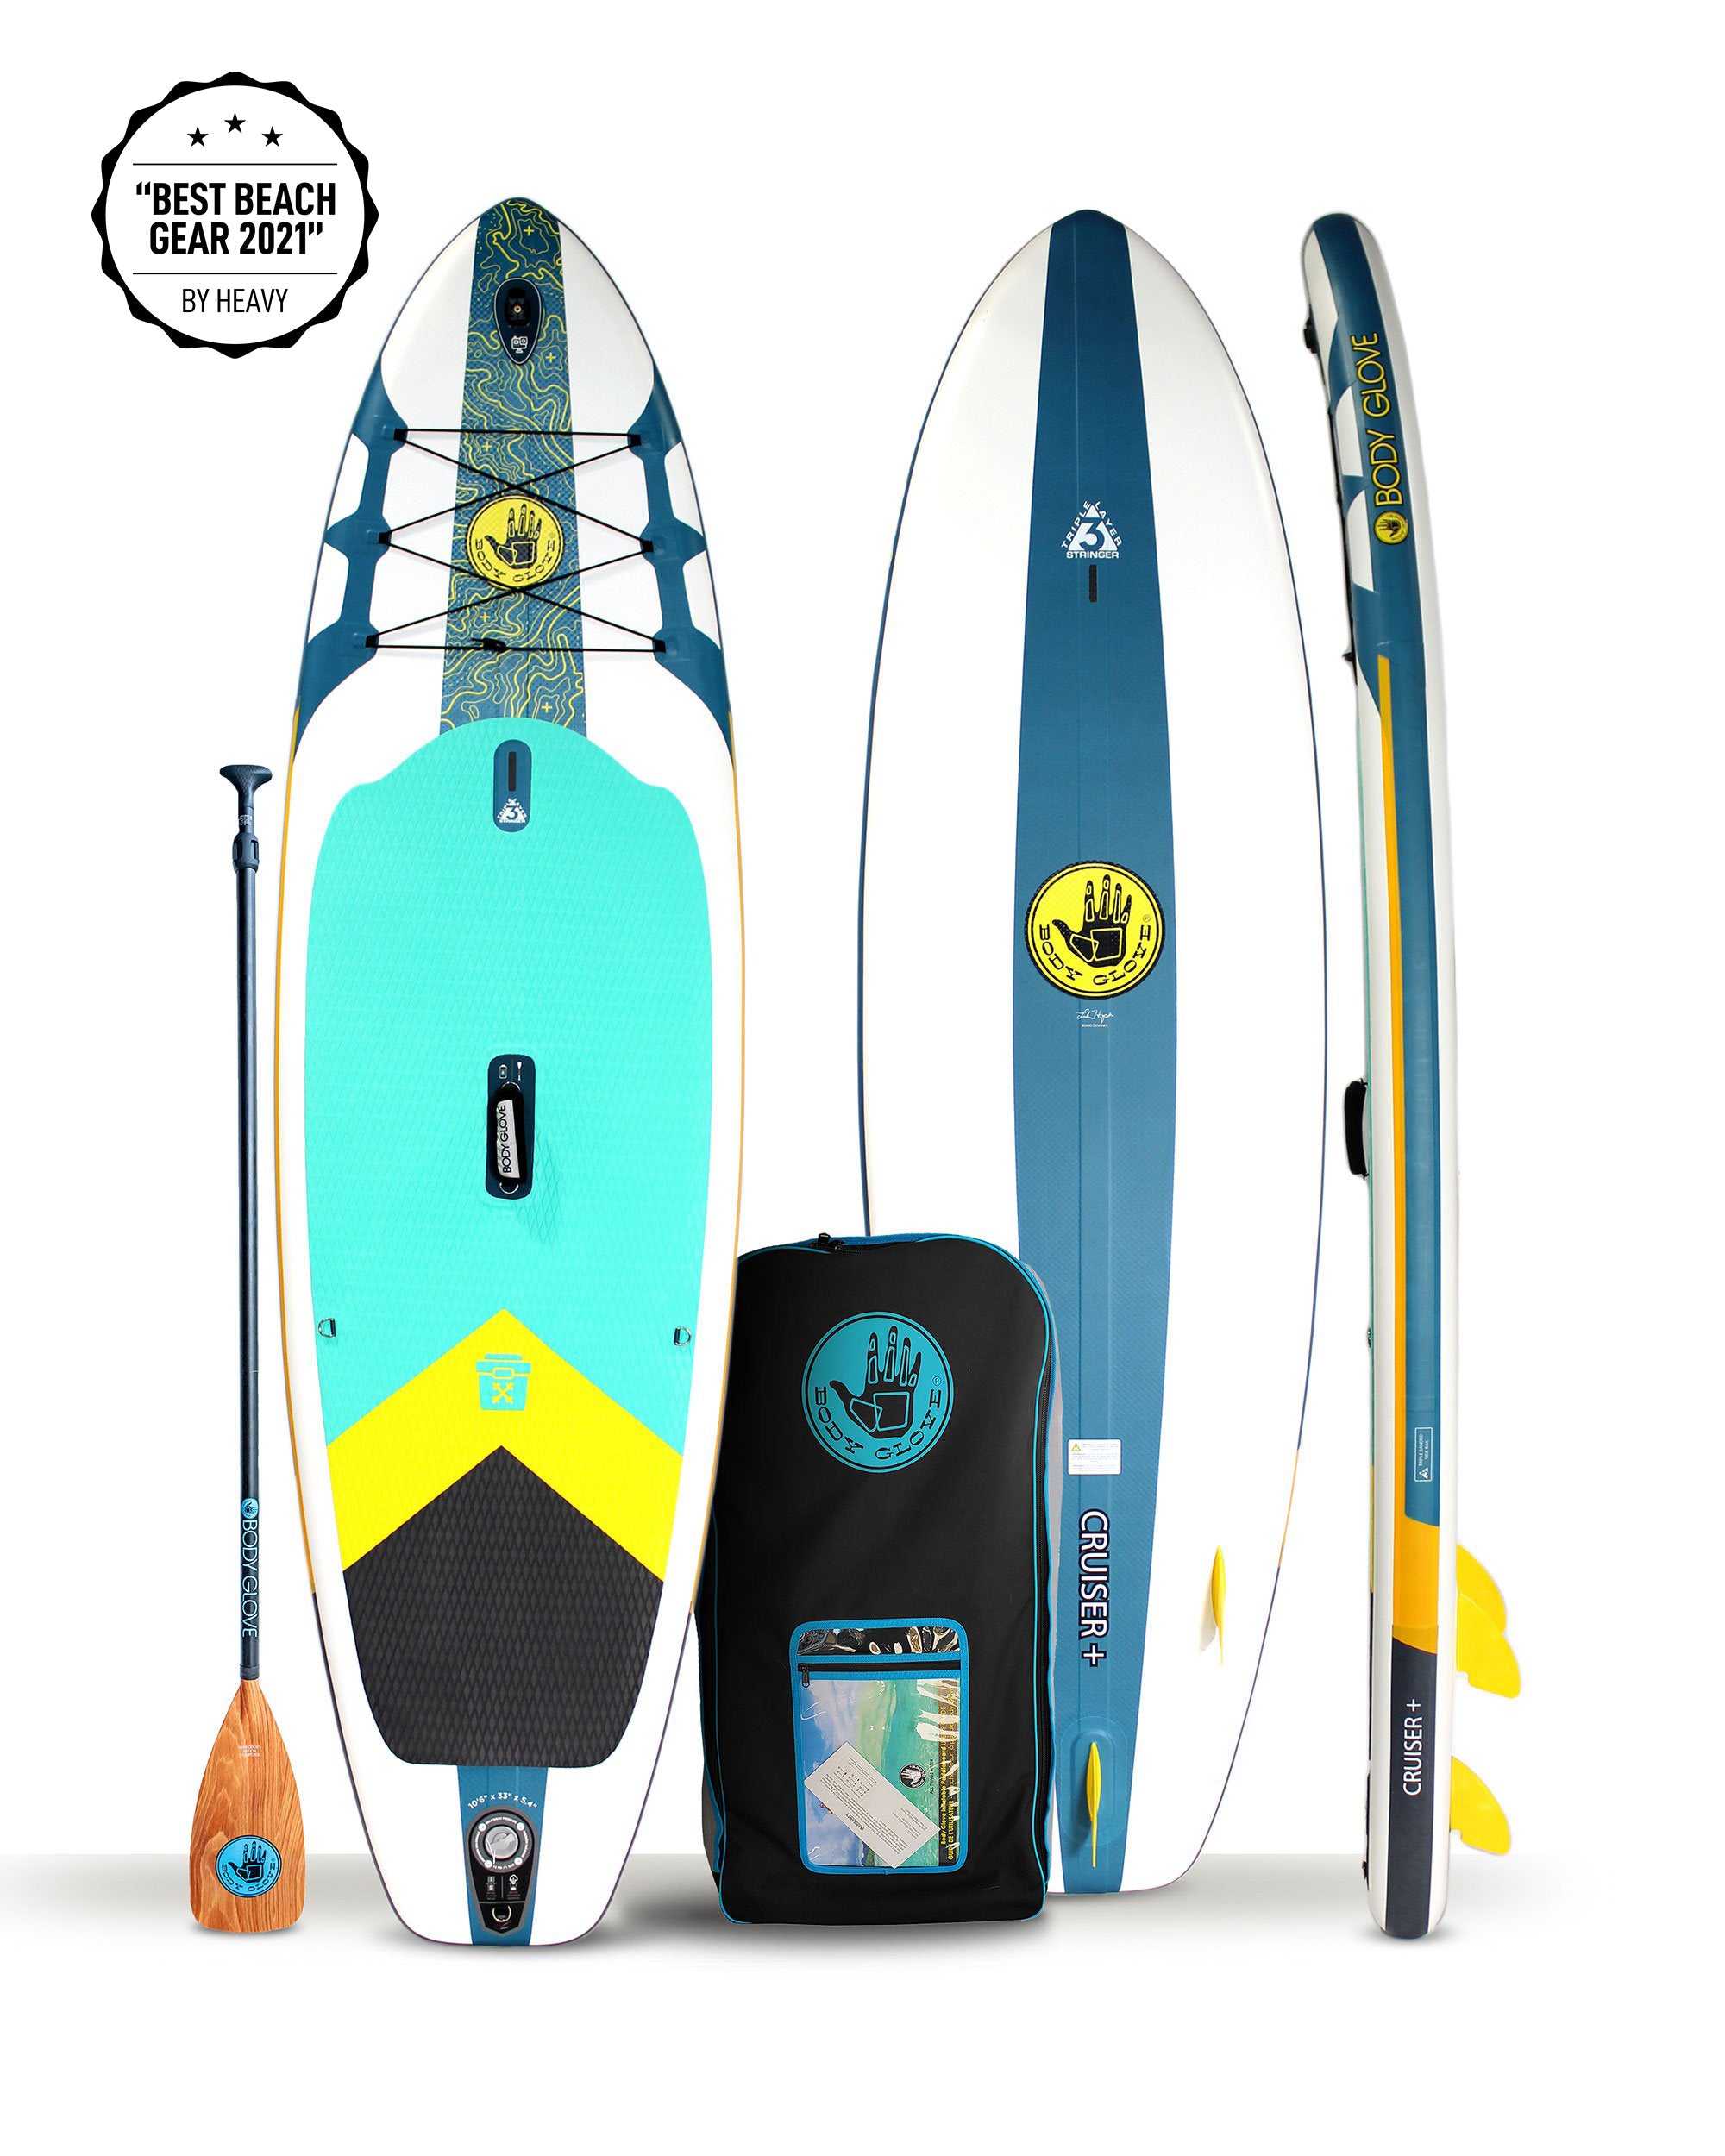 Cruiser+ 10'6" Inflatable Paddle Board - Teal/White